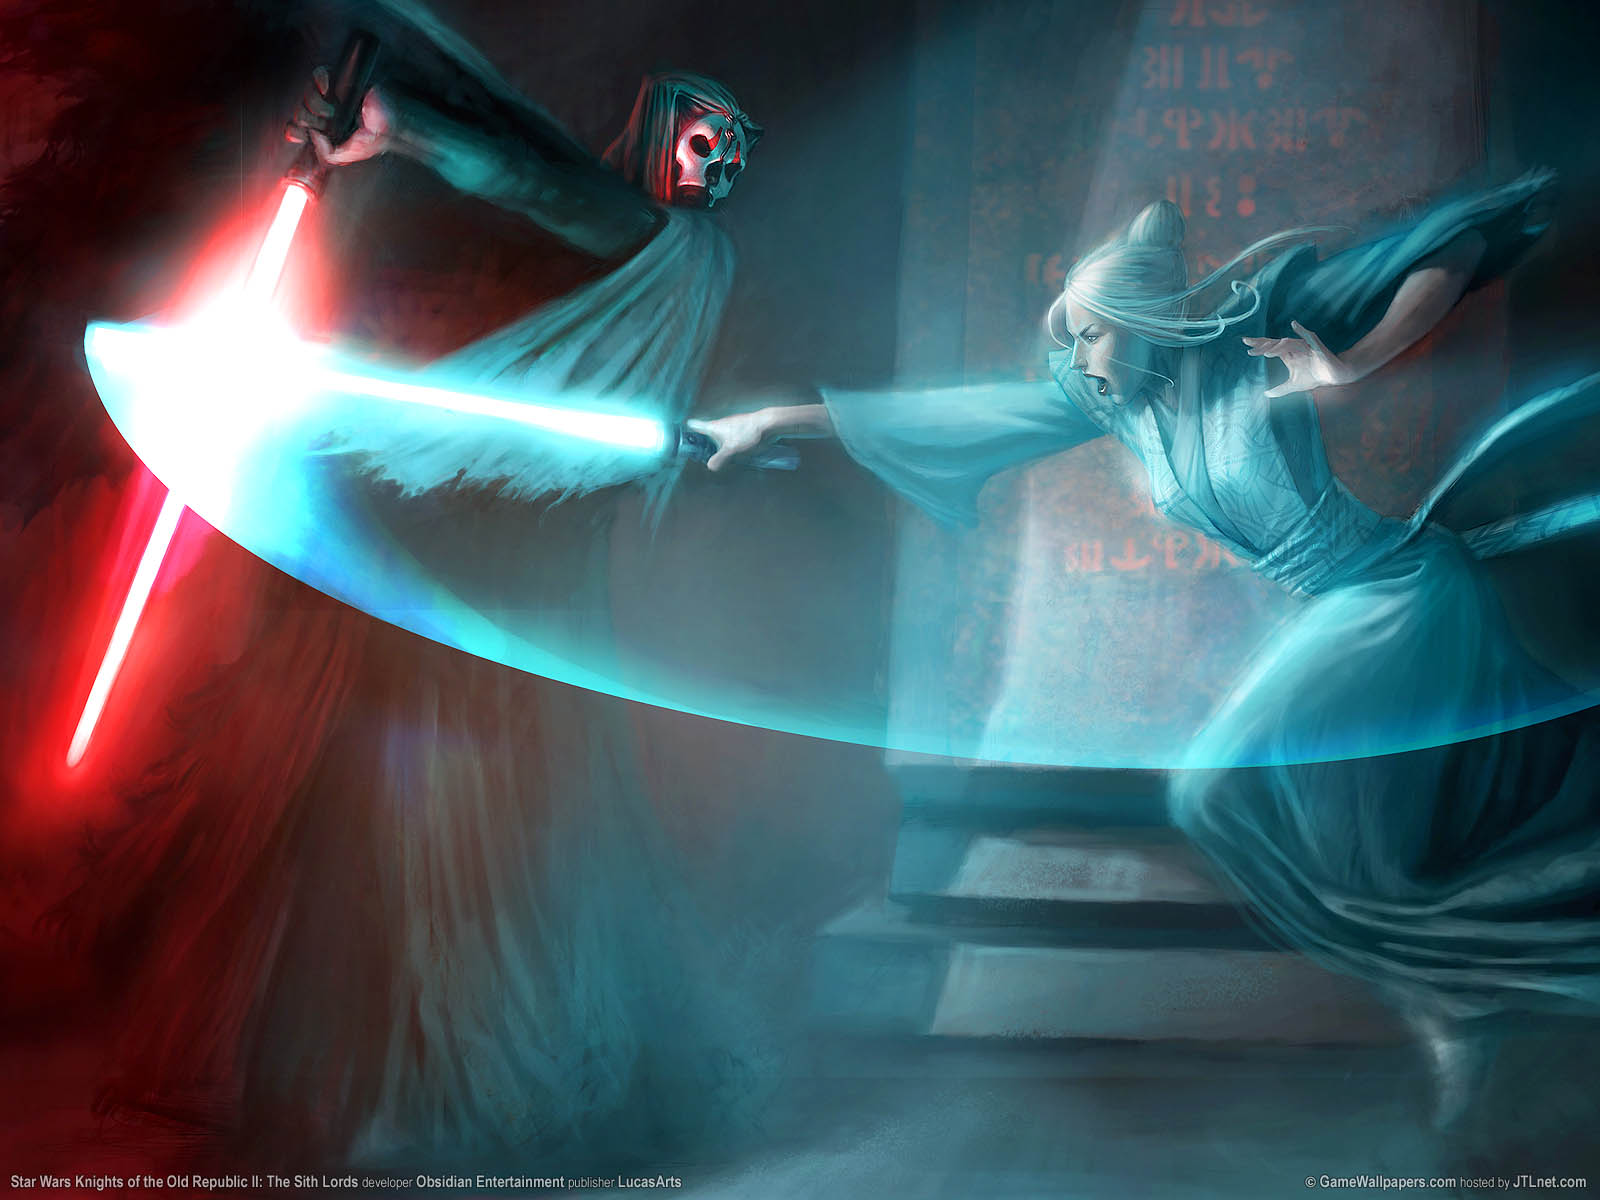 Star Wars%25253A Knights of the Old Republic 2 wallpaper 02 1600x1200